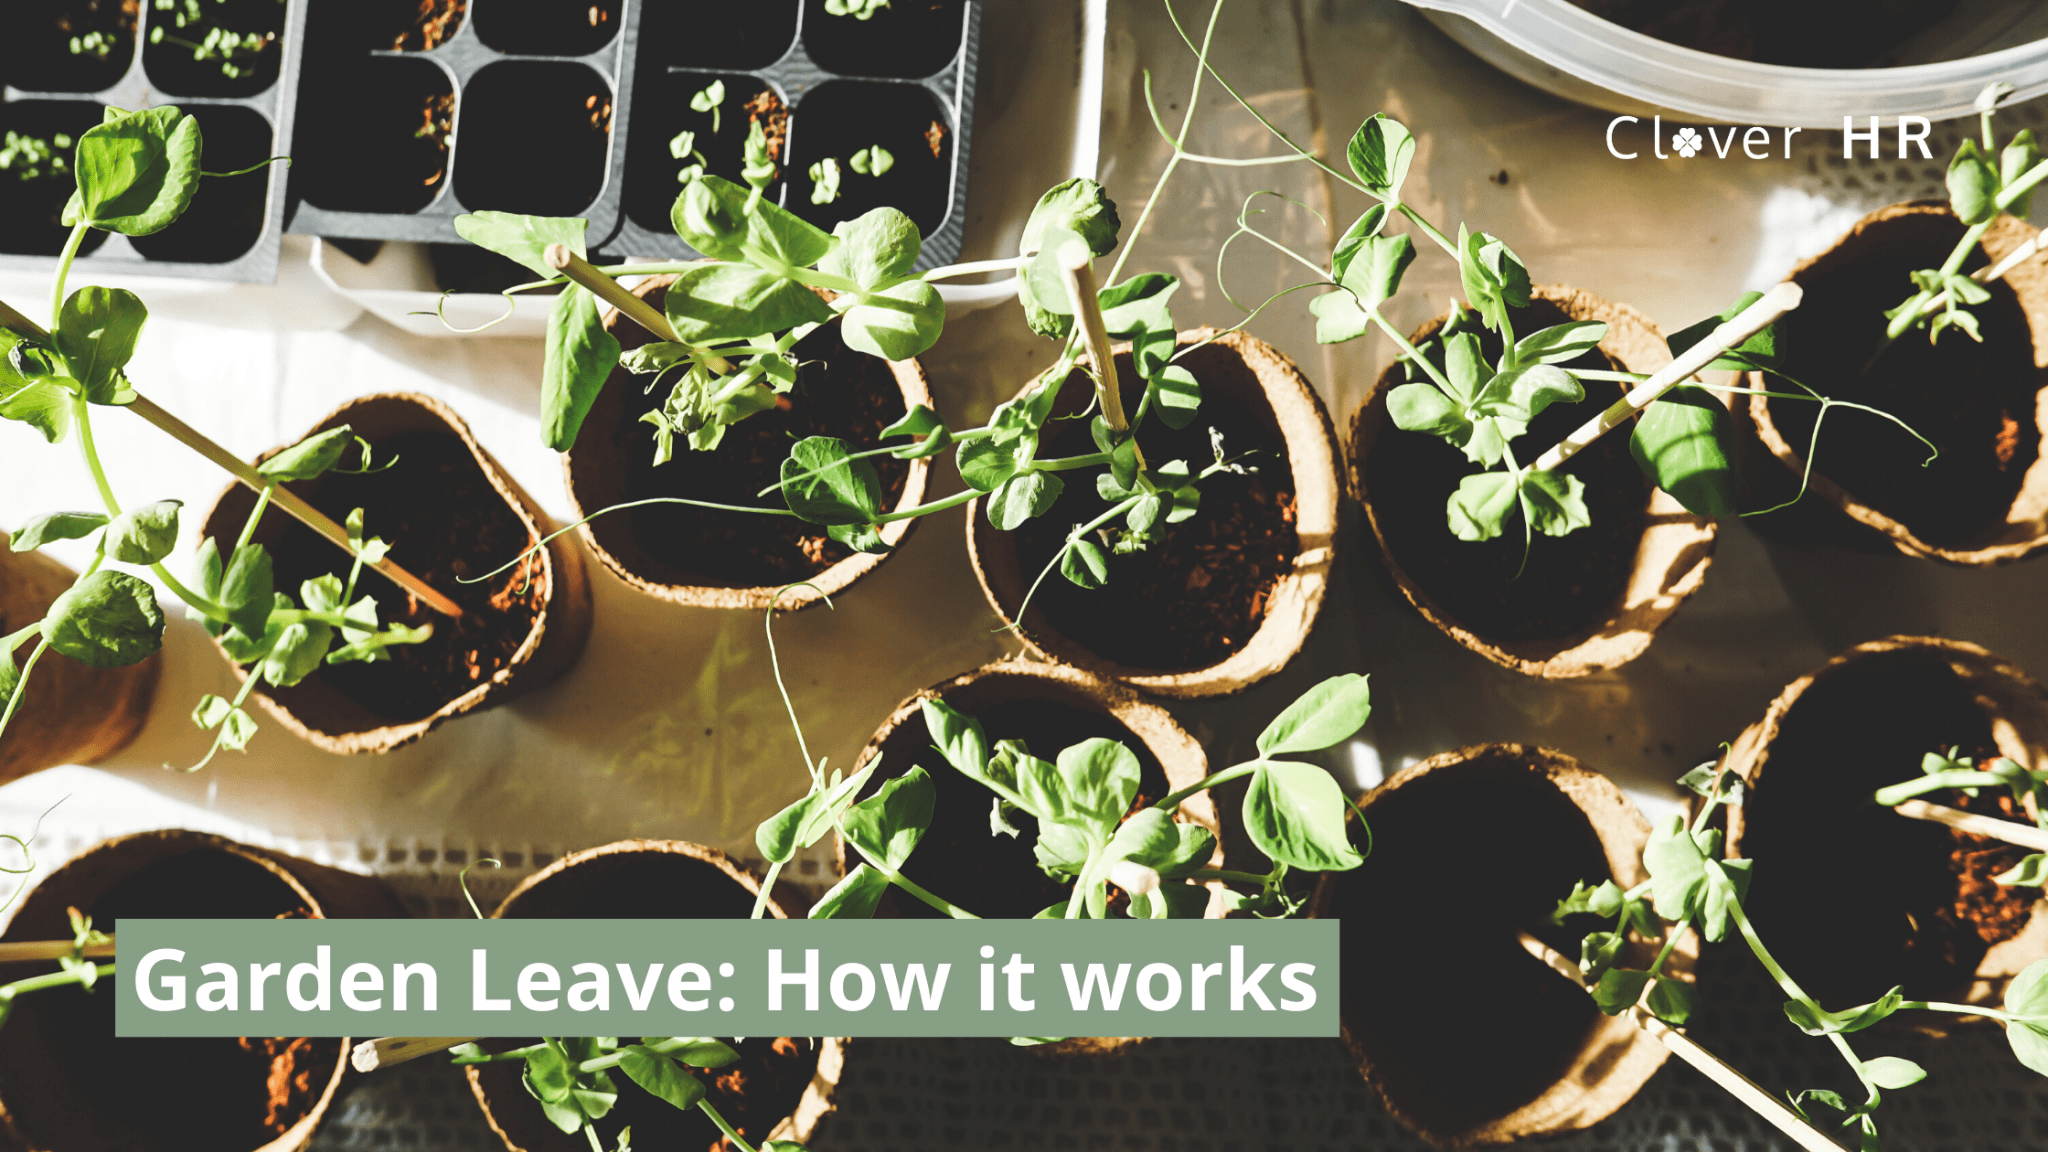 Garden Leave Your Comprehensive Guide 2021